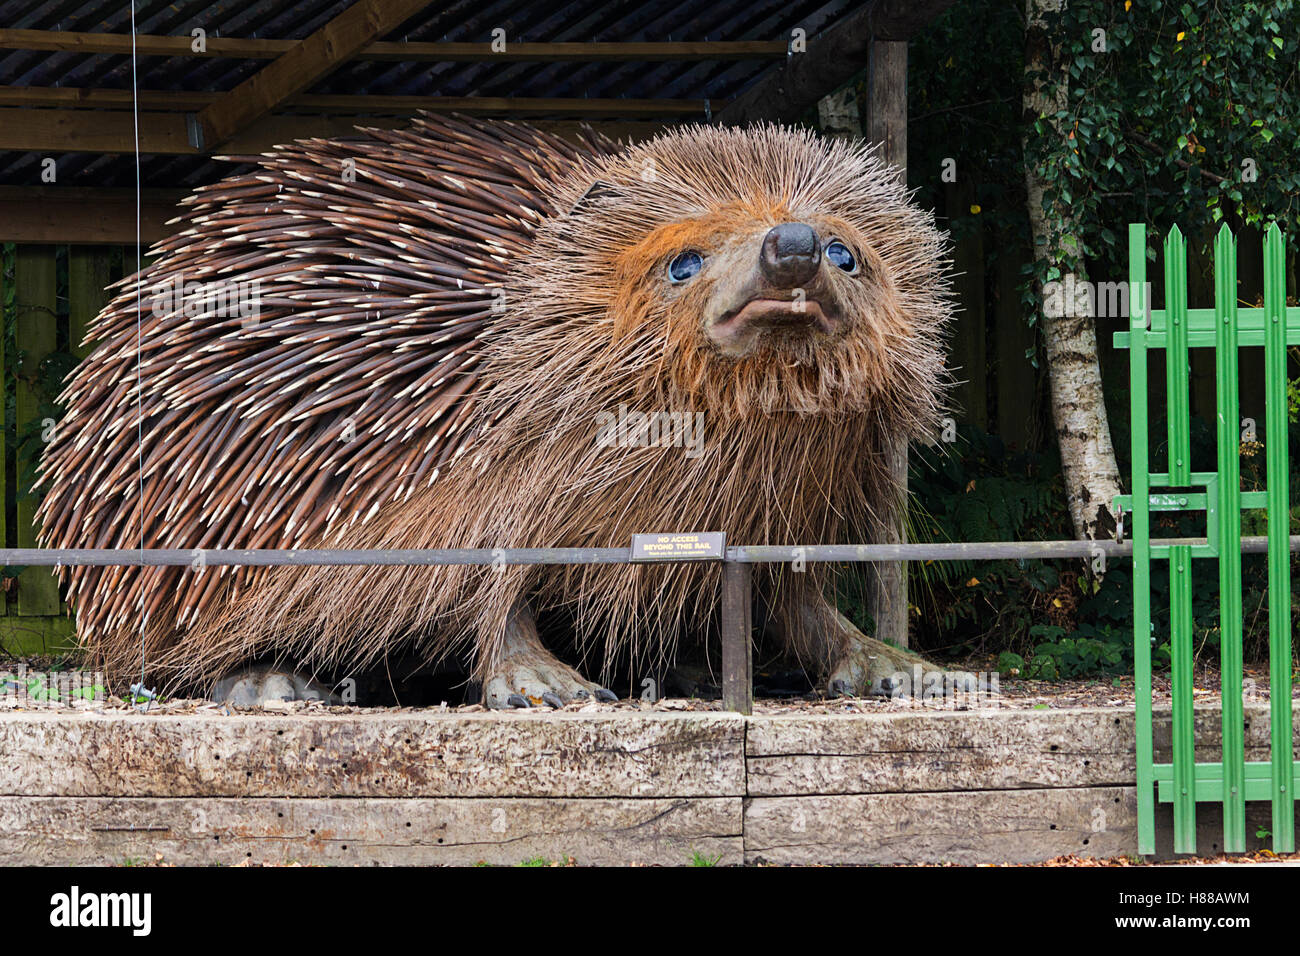 Giant replica hedgehog (erinaceus europaeus) at entrance to British Wildlife center in Surrey UK. Lifelike detailed model with spines all giant sized. Stock Photo